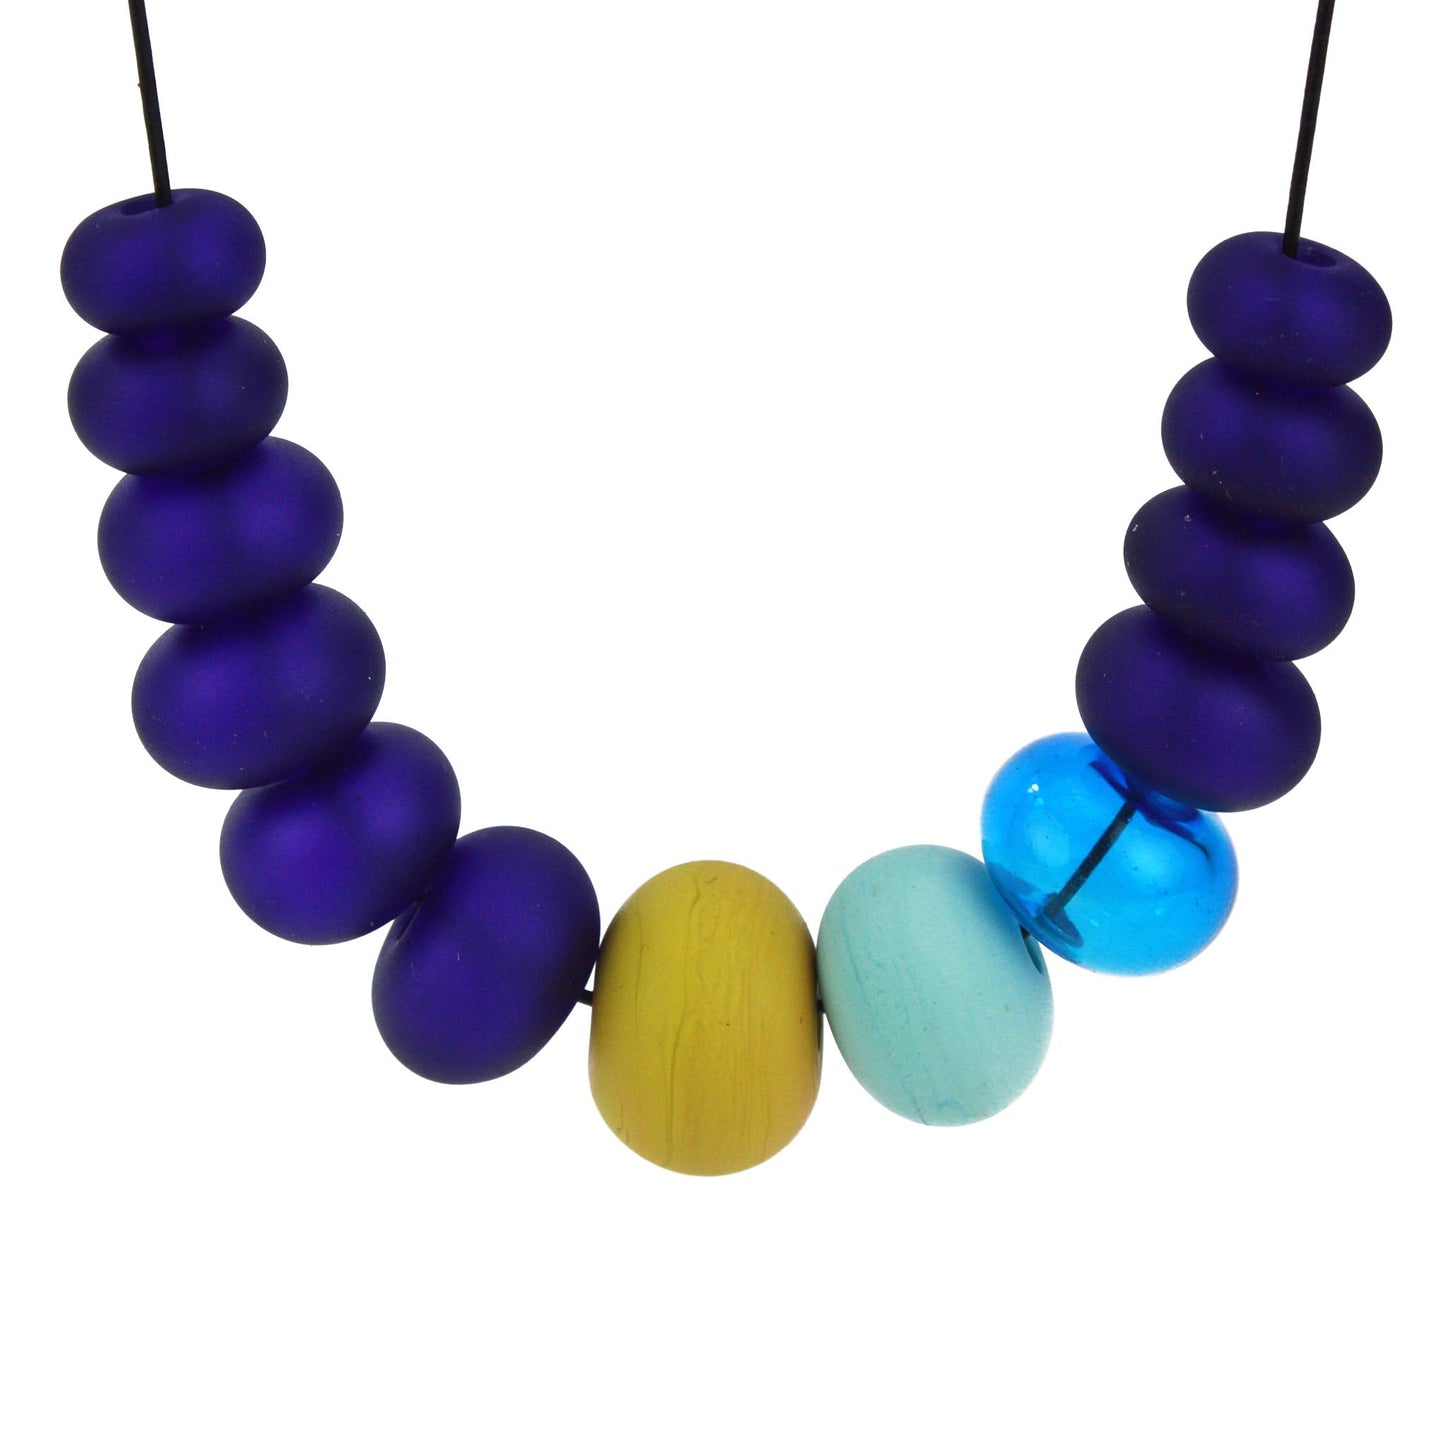 13 bead Bubble necklace - cobalt, yellow and turquoise